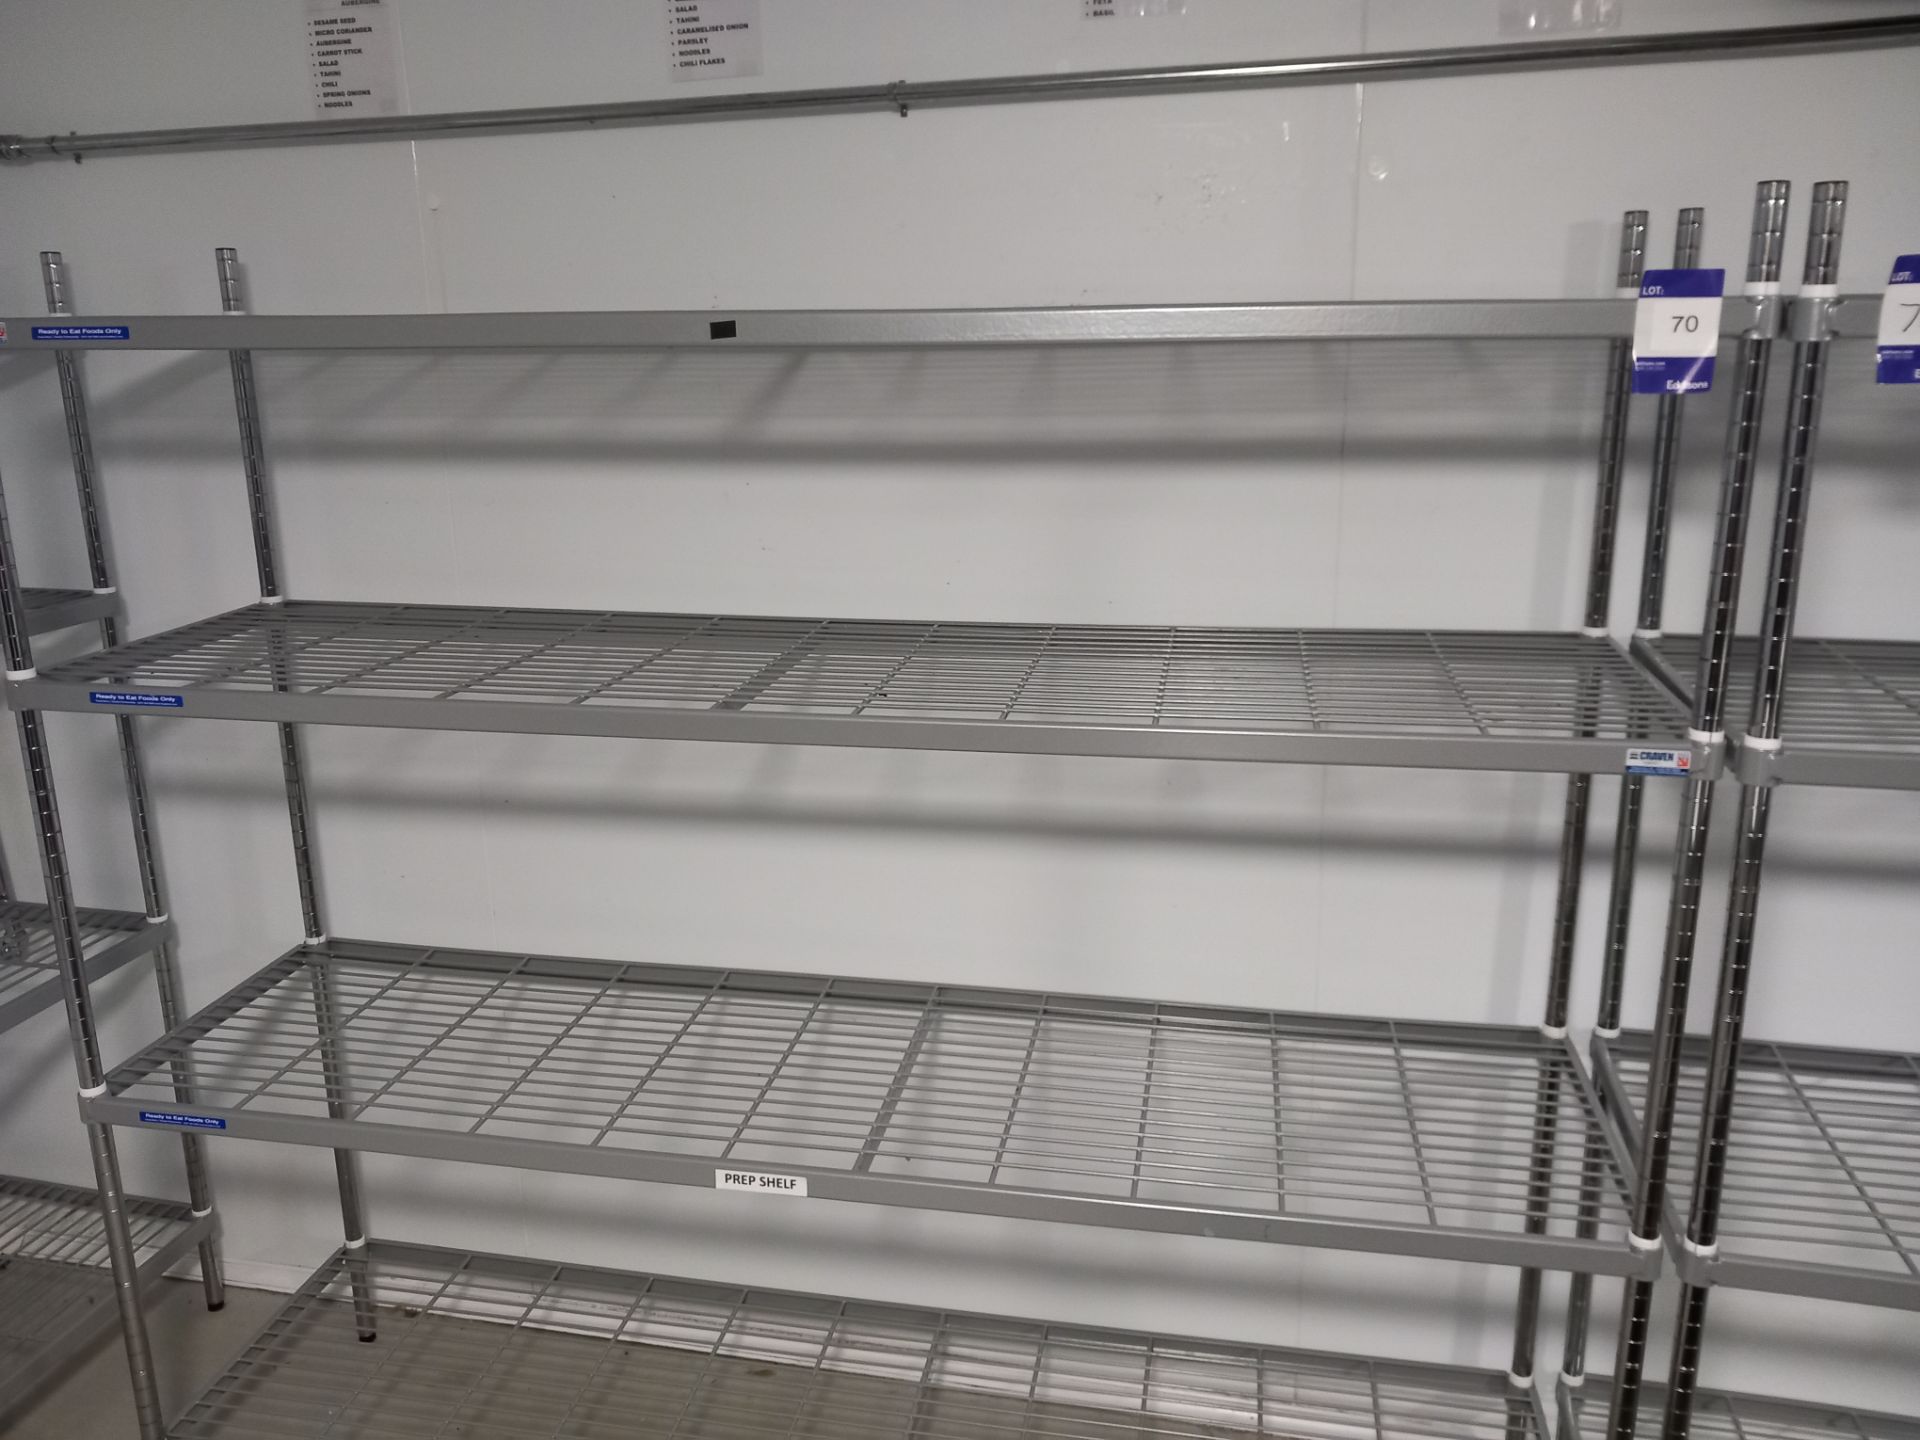 2 x Craven adjustable wire racking shelving units